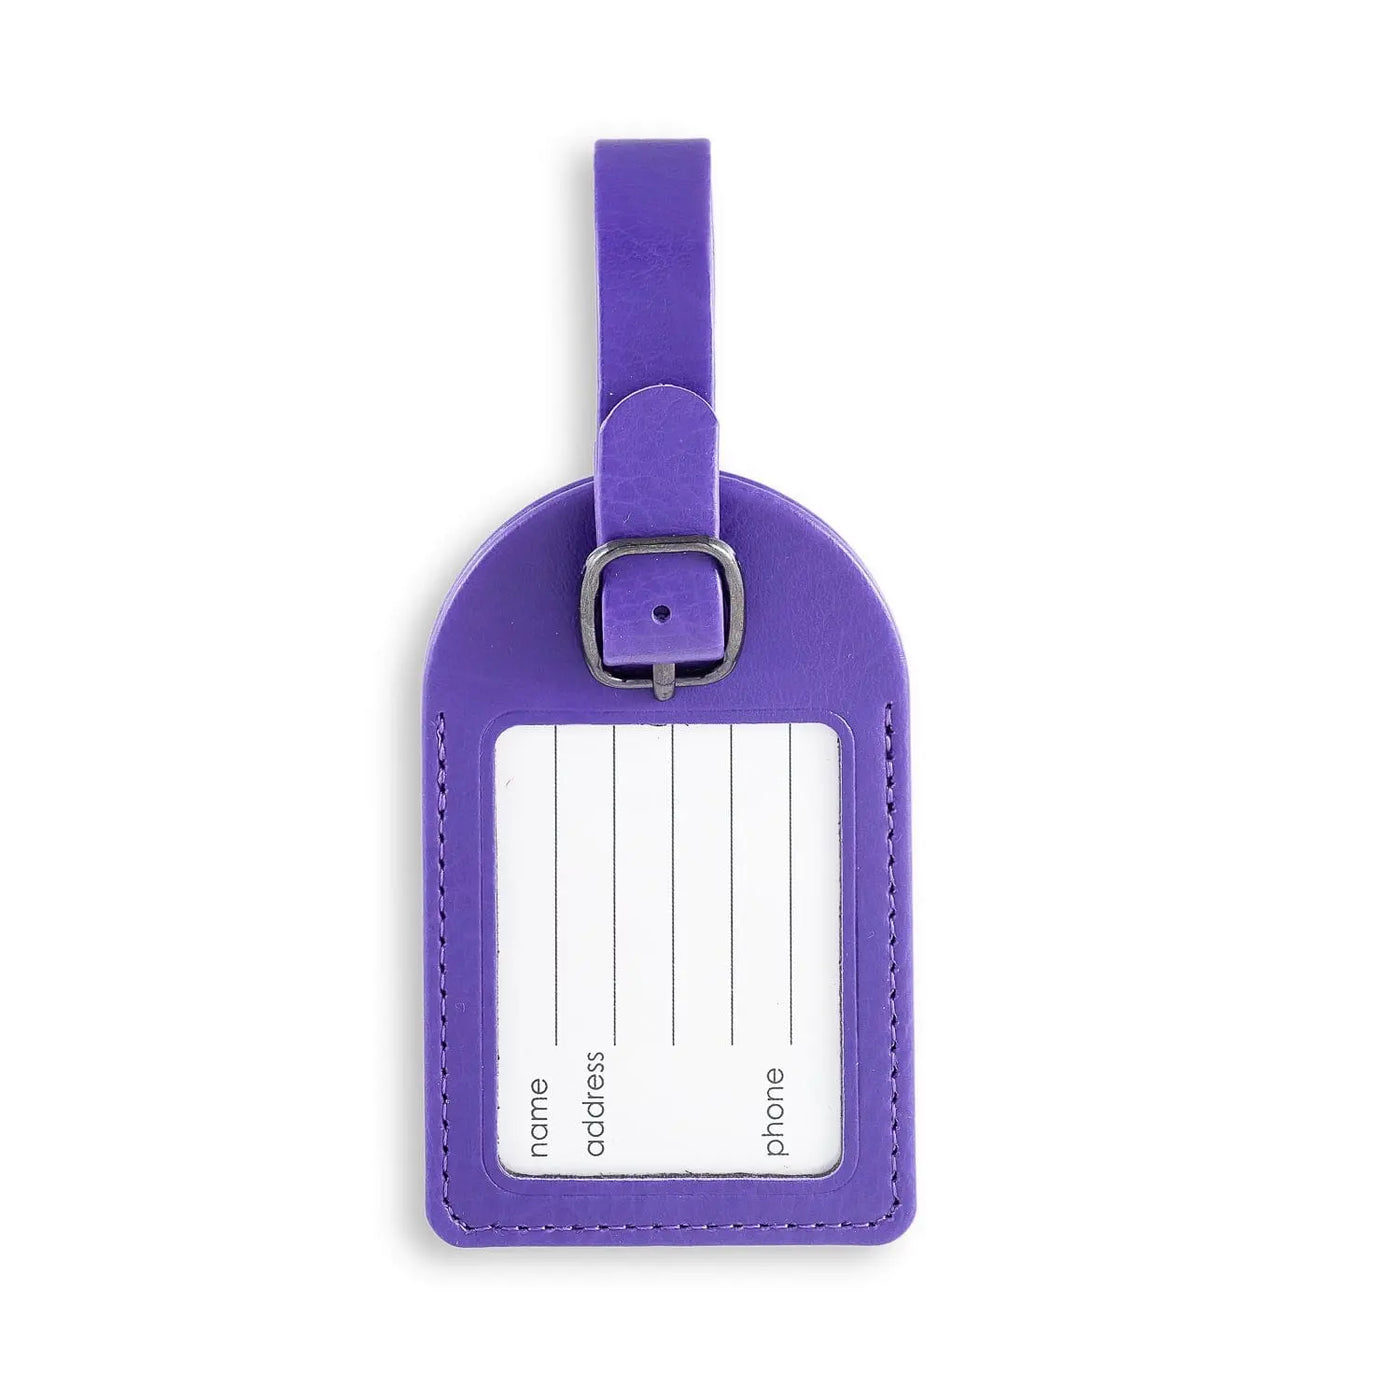 Citizen of the World Luggage Tag - Migration Museum Shop